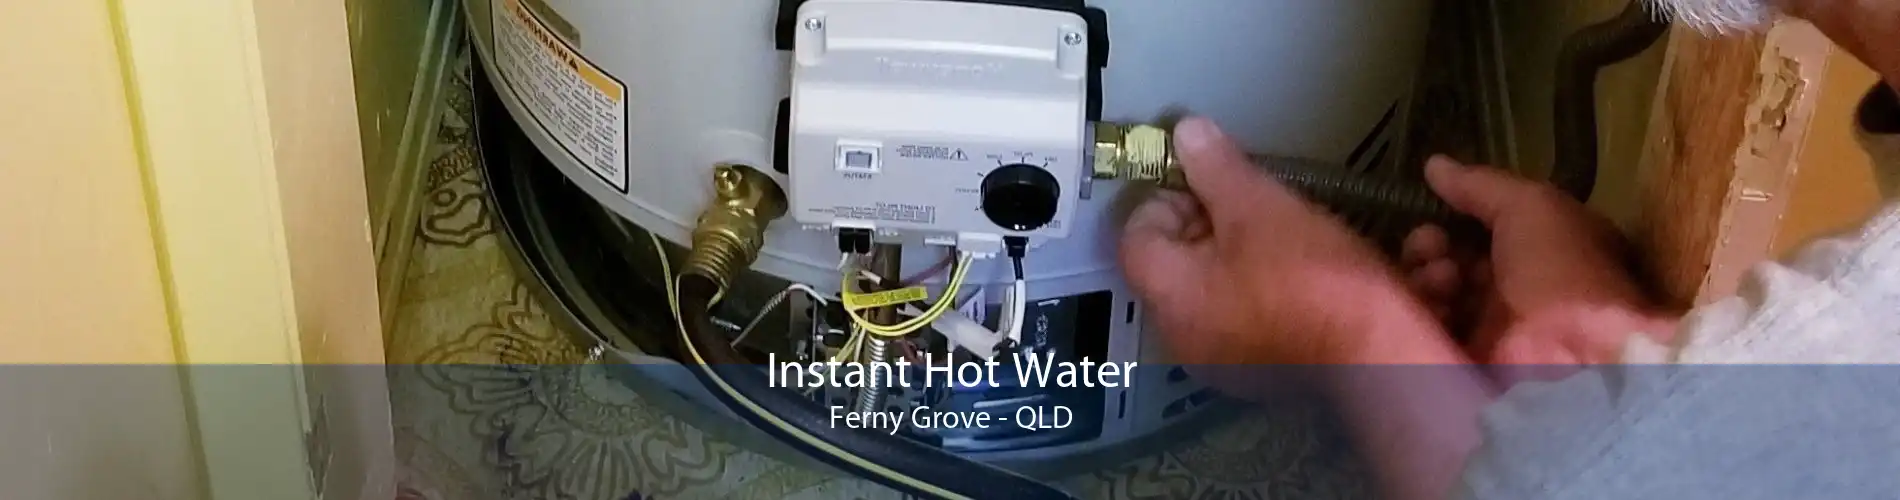 Instant Hot Water Ferny Grove - QLD